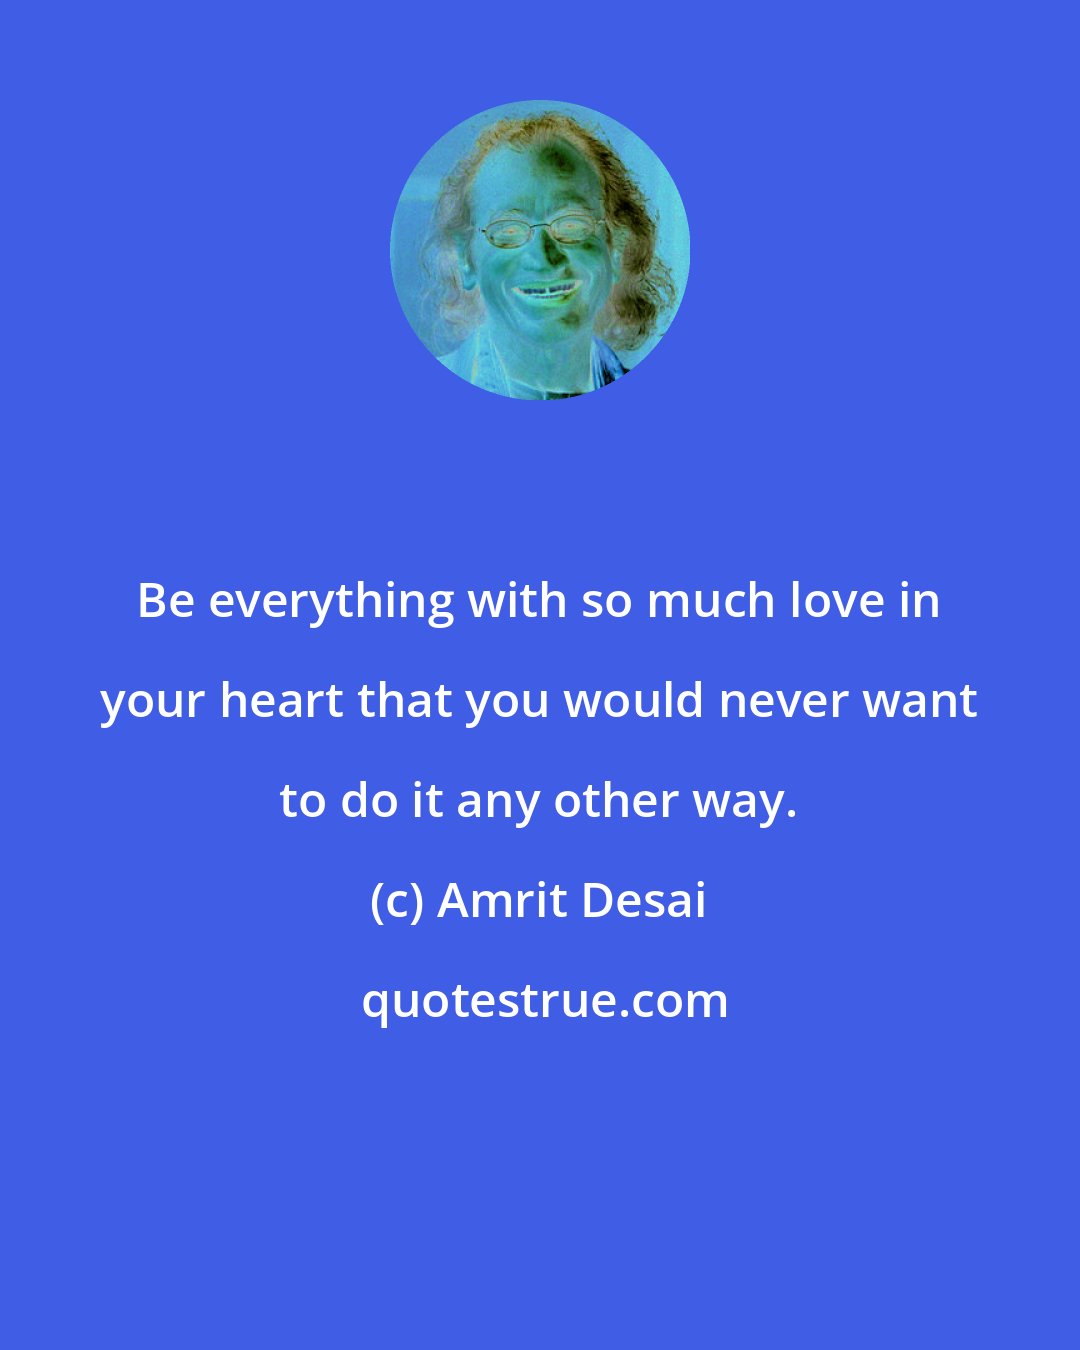 Amrit Desai: Be everything with so much love in your heart that you would never want to do it any other way.